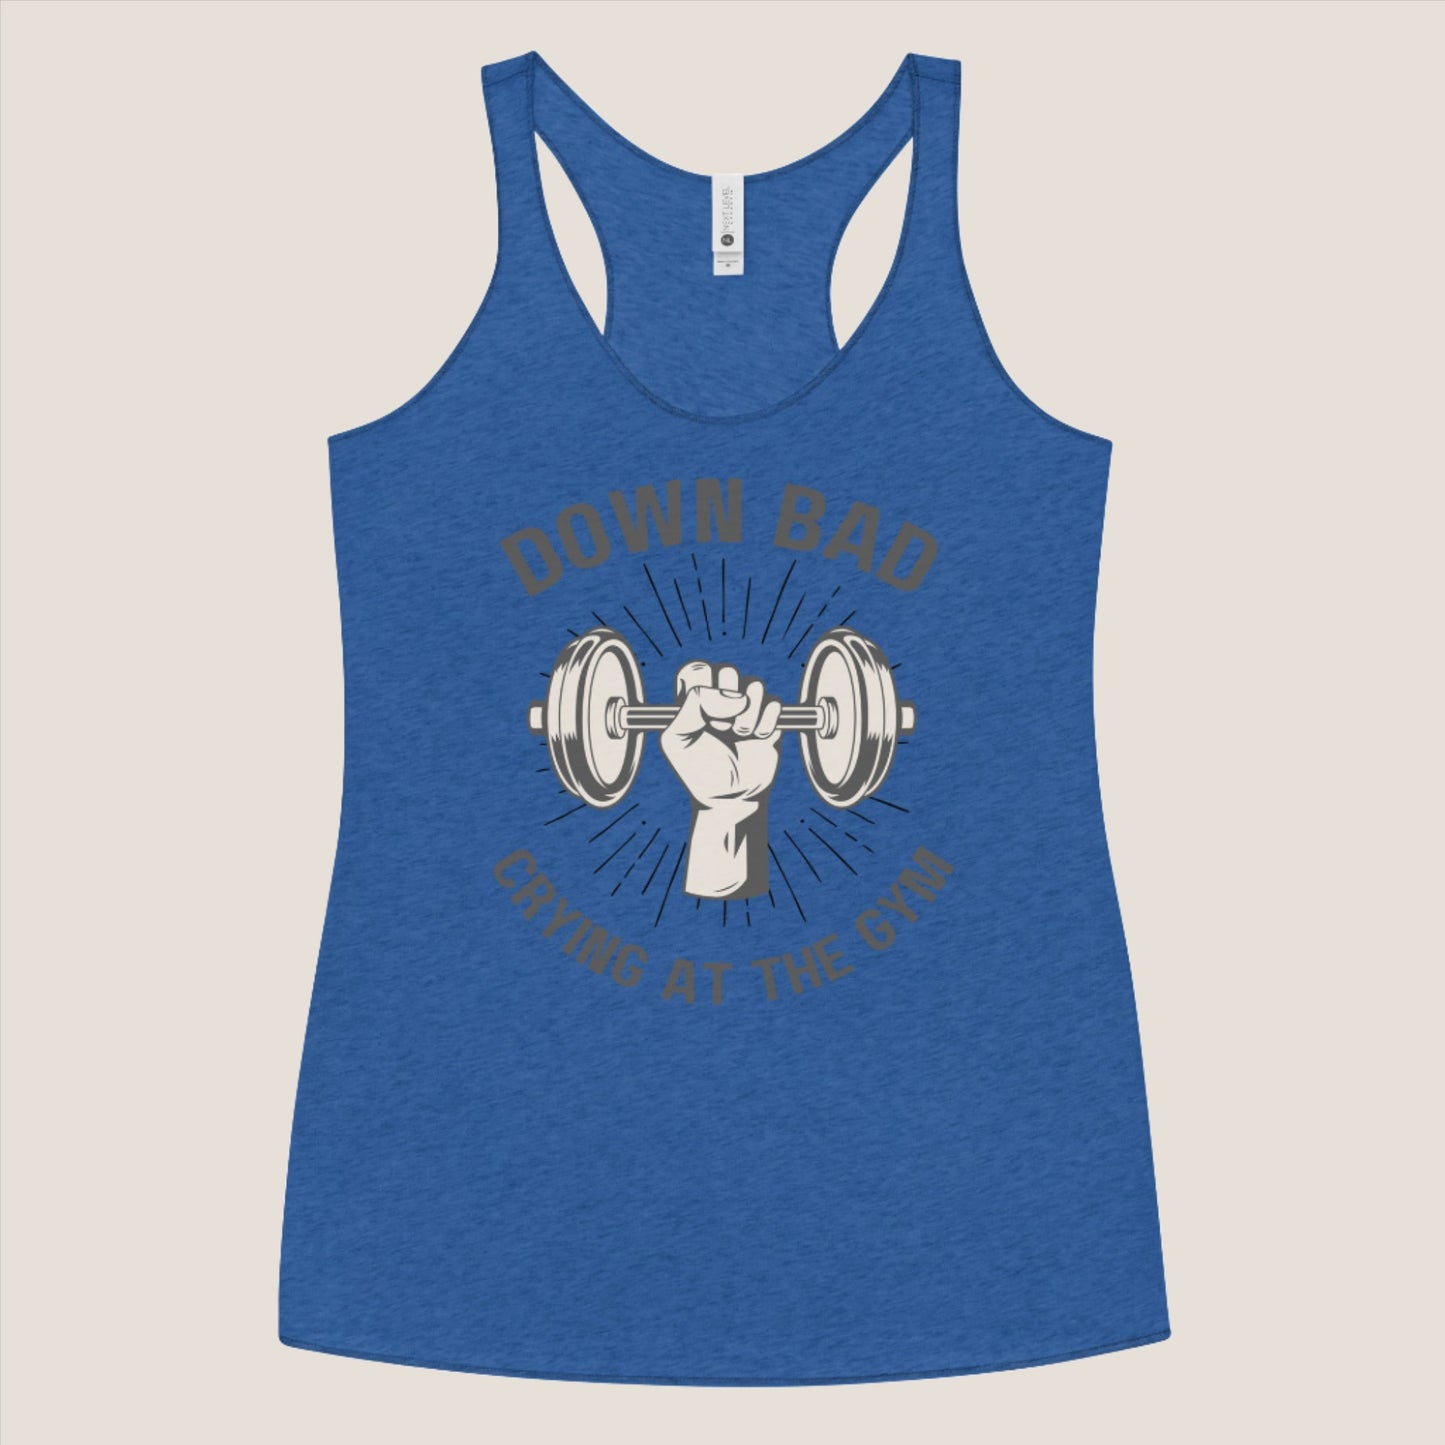 "Down Bad Crying at the Gym" Taylor Swift inspired Women's Racerback Tank // Delysia Designs